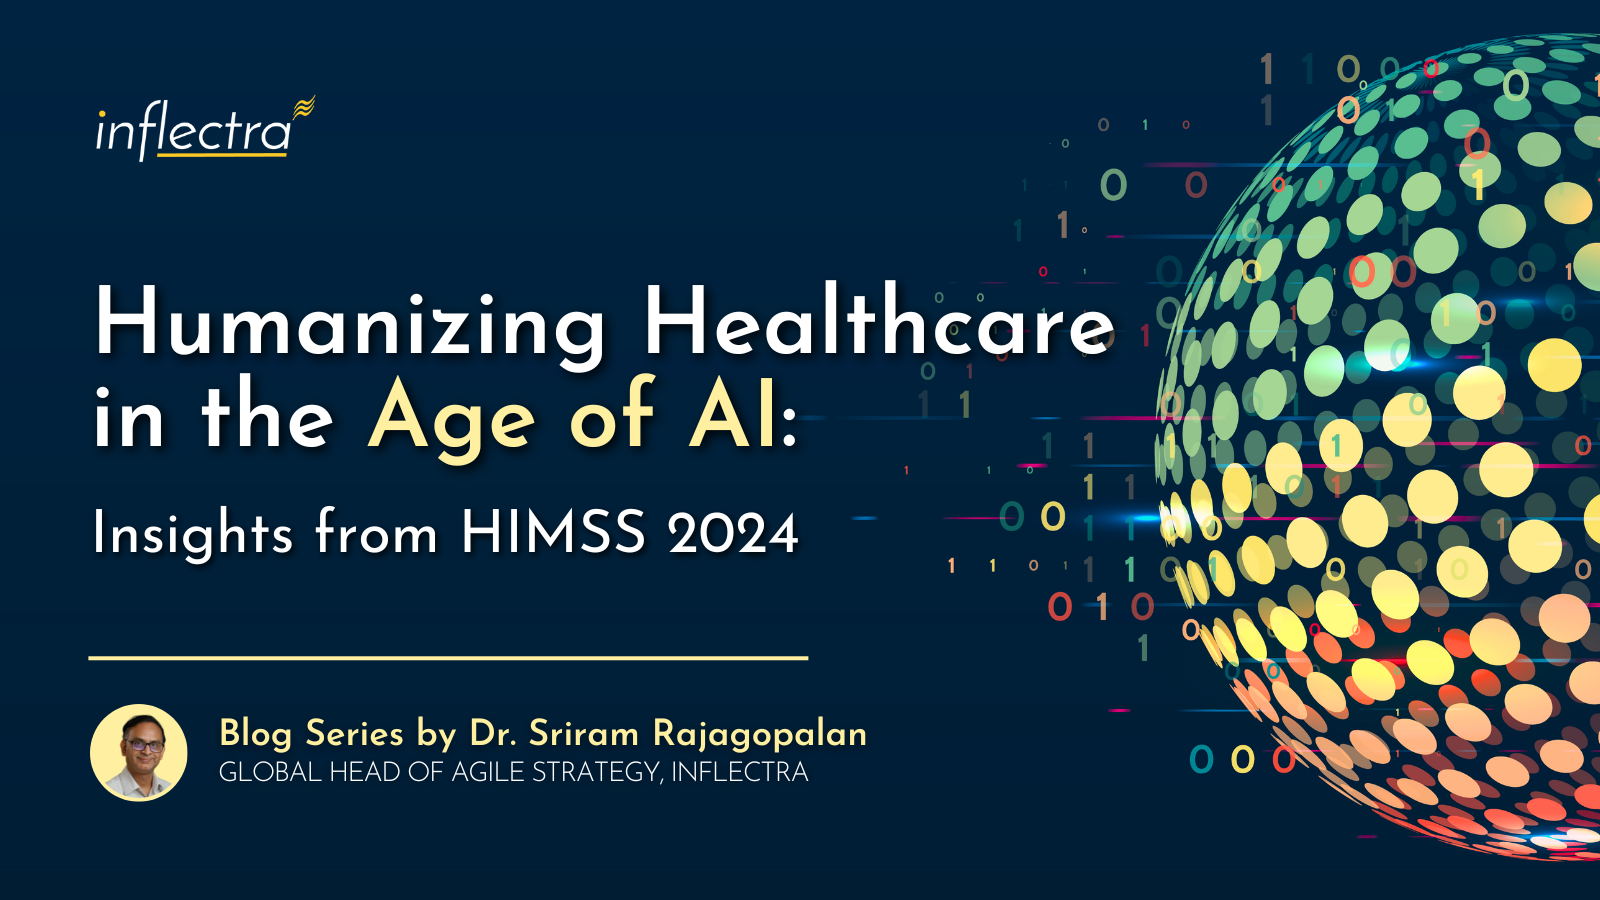 Text: Humanizing Healthcare in the Age of AI: Insights from HIMSS 2024. Blog Series by Dr. Sriram Rajagopalan, Global Head of Agile Strategy, Inflectra